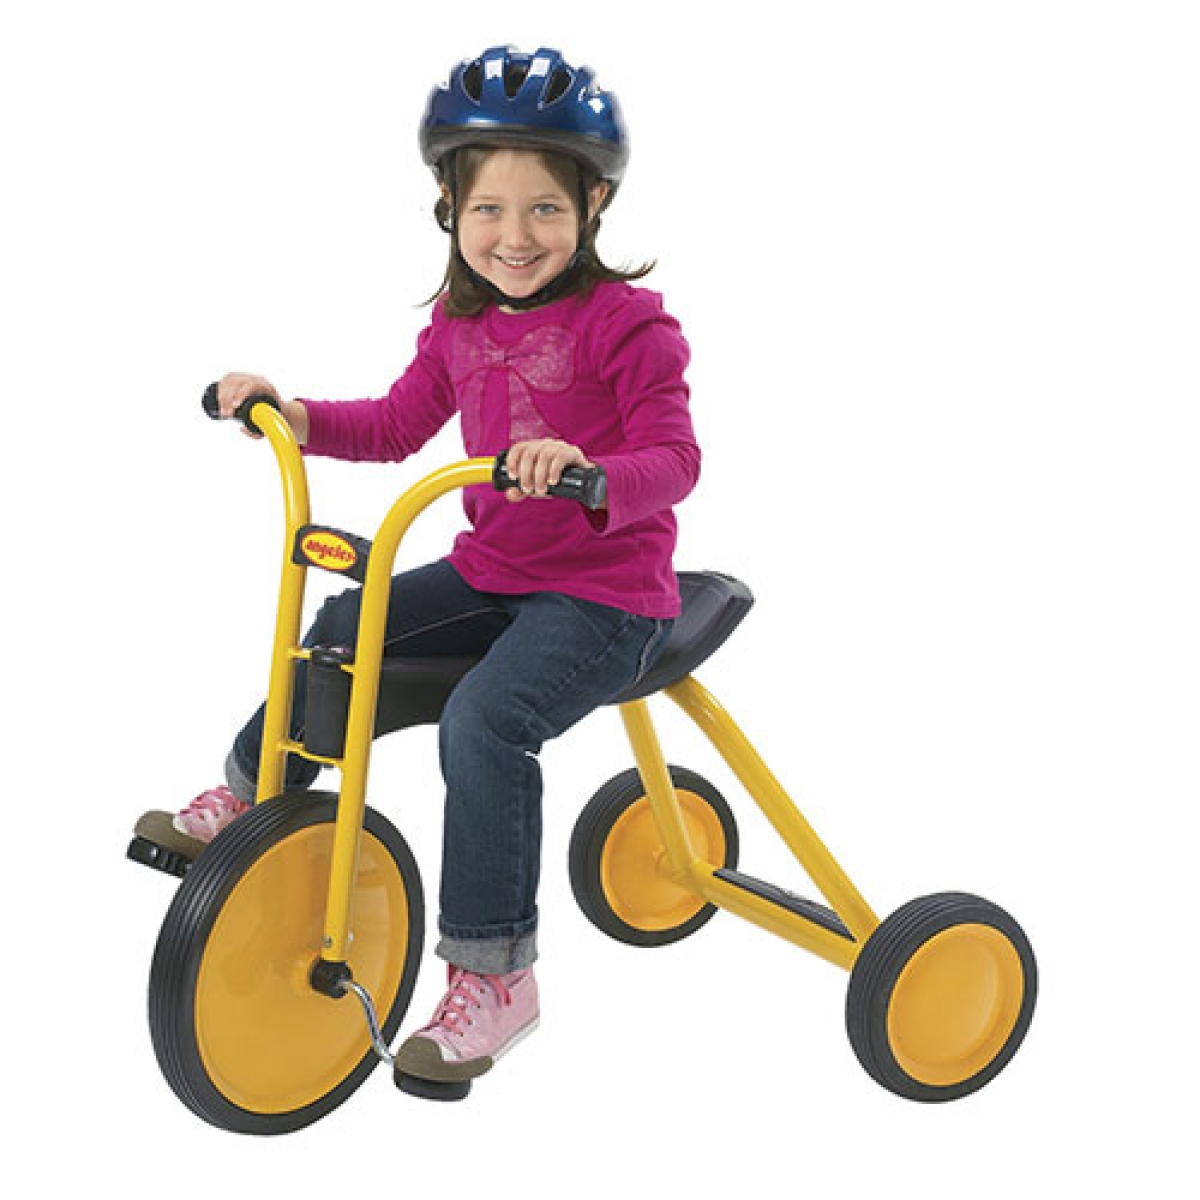 Italtrike Yellow Tricycle, 1 seat - FREE SHIPPING